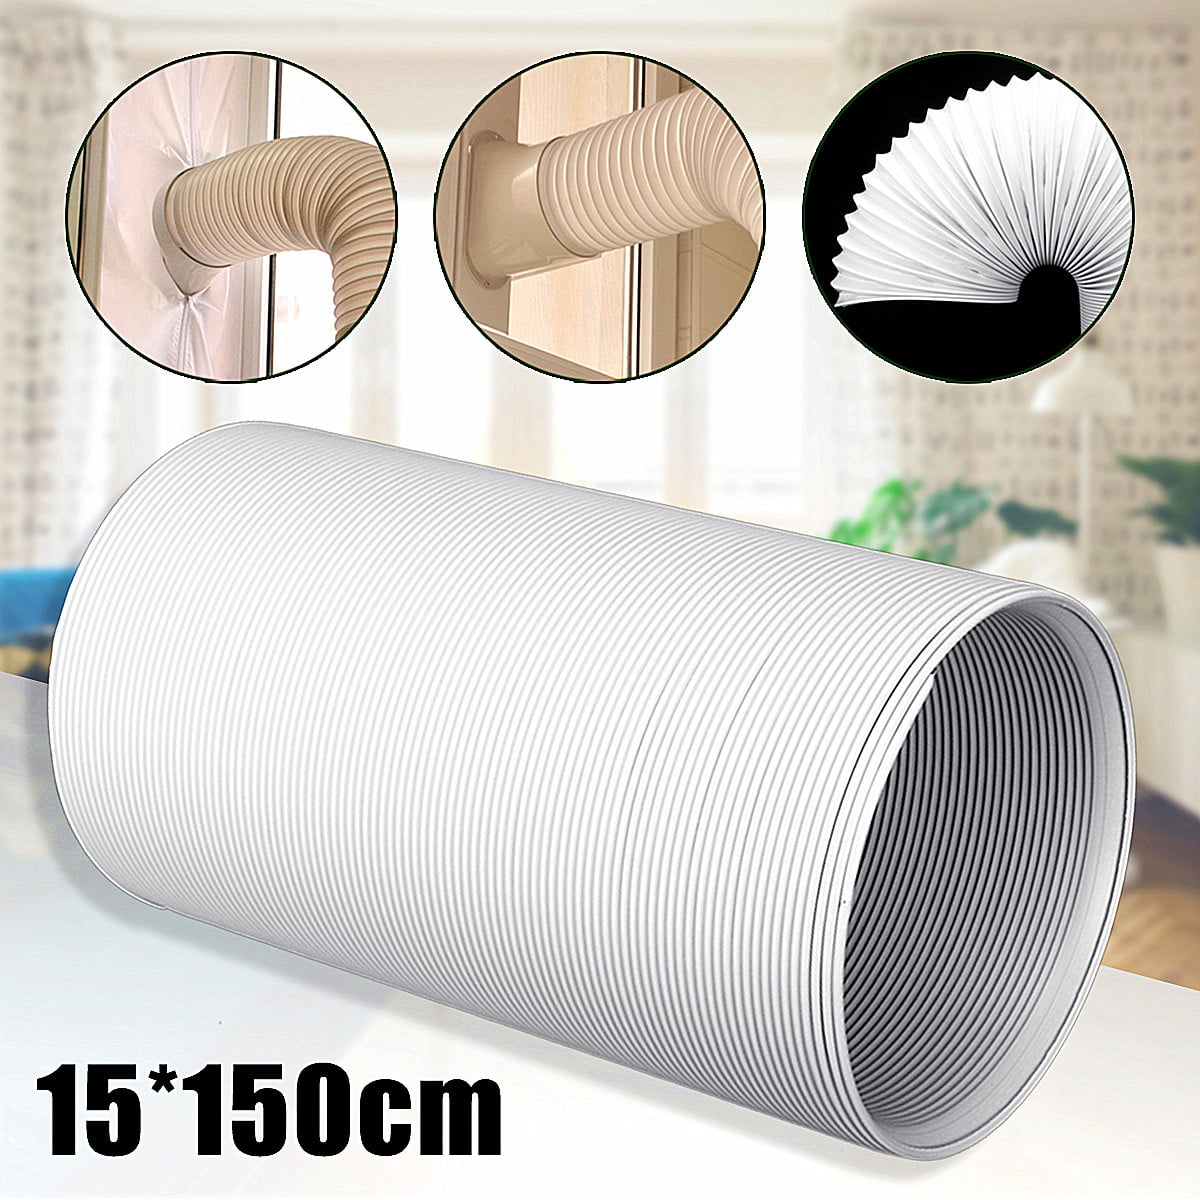 Exhausting for Air Conditioner XINL Air Conditioner Exhaust Hose Counter-Clockwise Plastic Conditioner Exhaust Hose Diameter 15cm*2M 